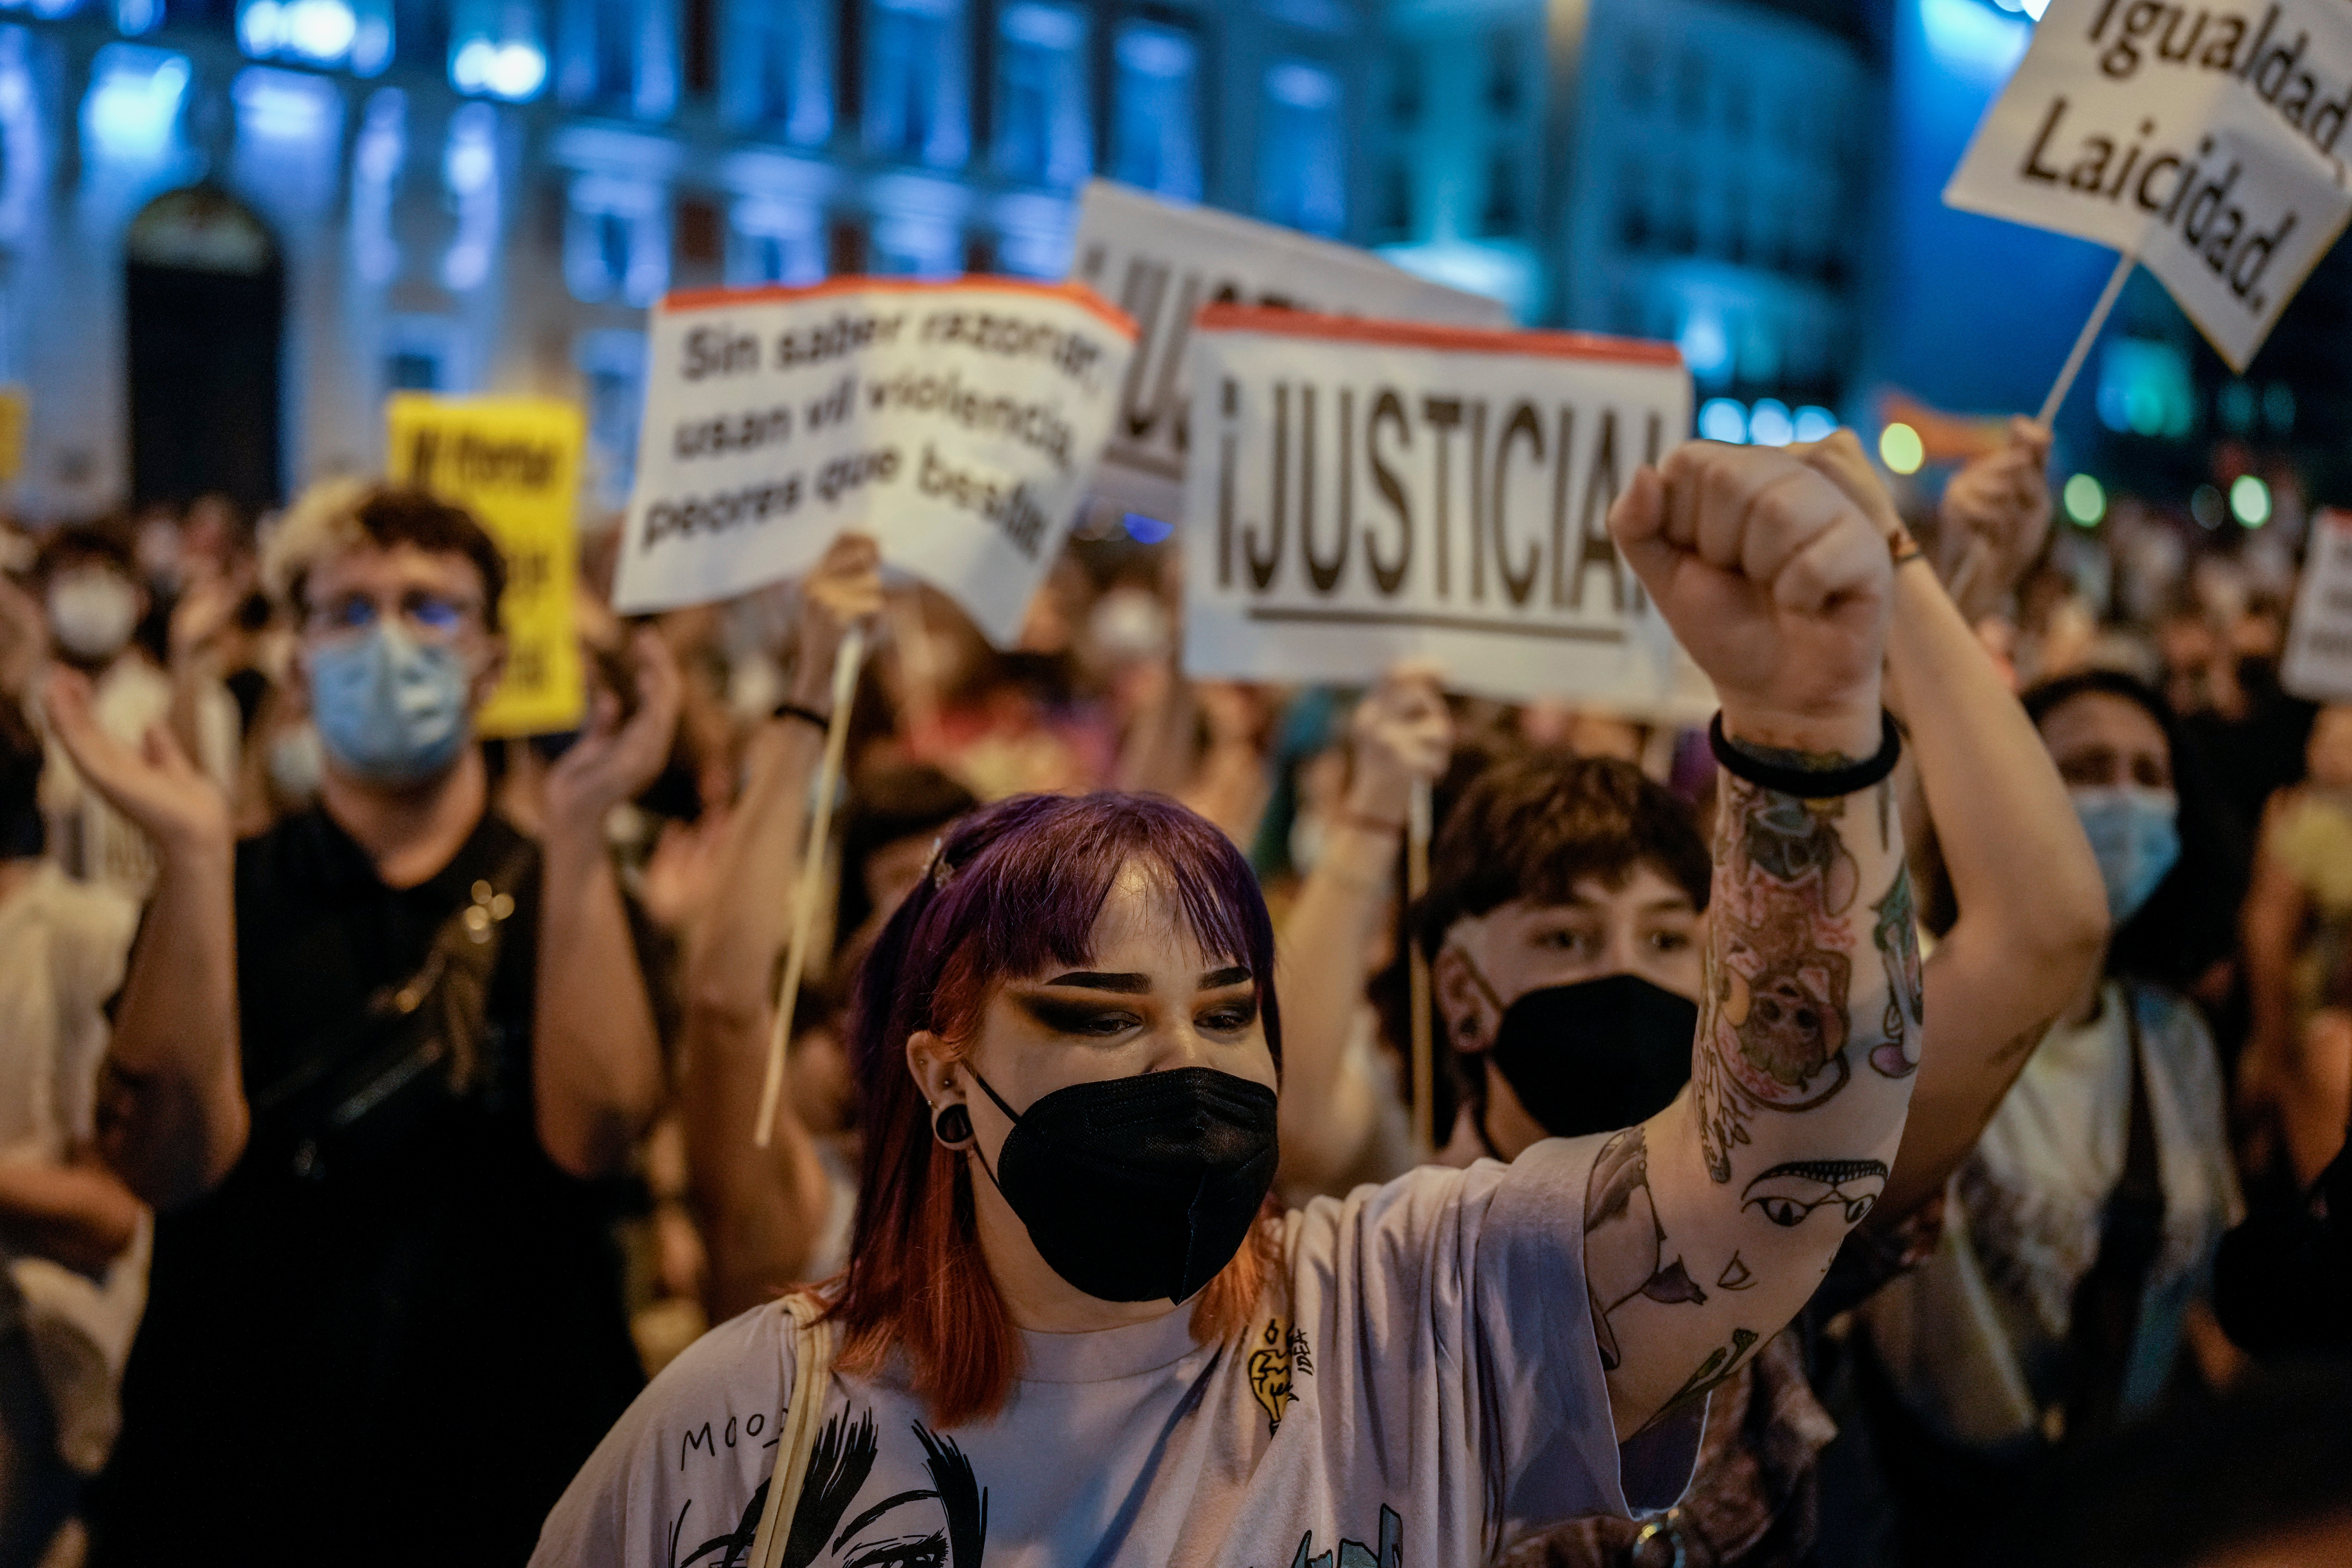 Dozens gathered at Sol square in Madrid on Wednesday night to protest against a rise in LGBT+ hate crimes